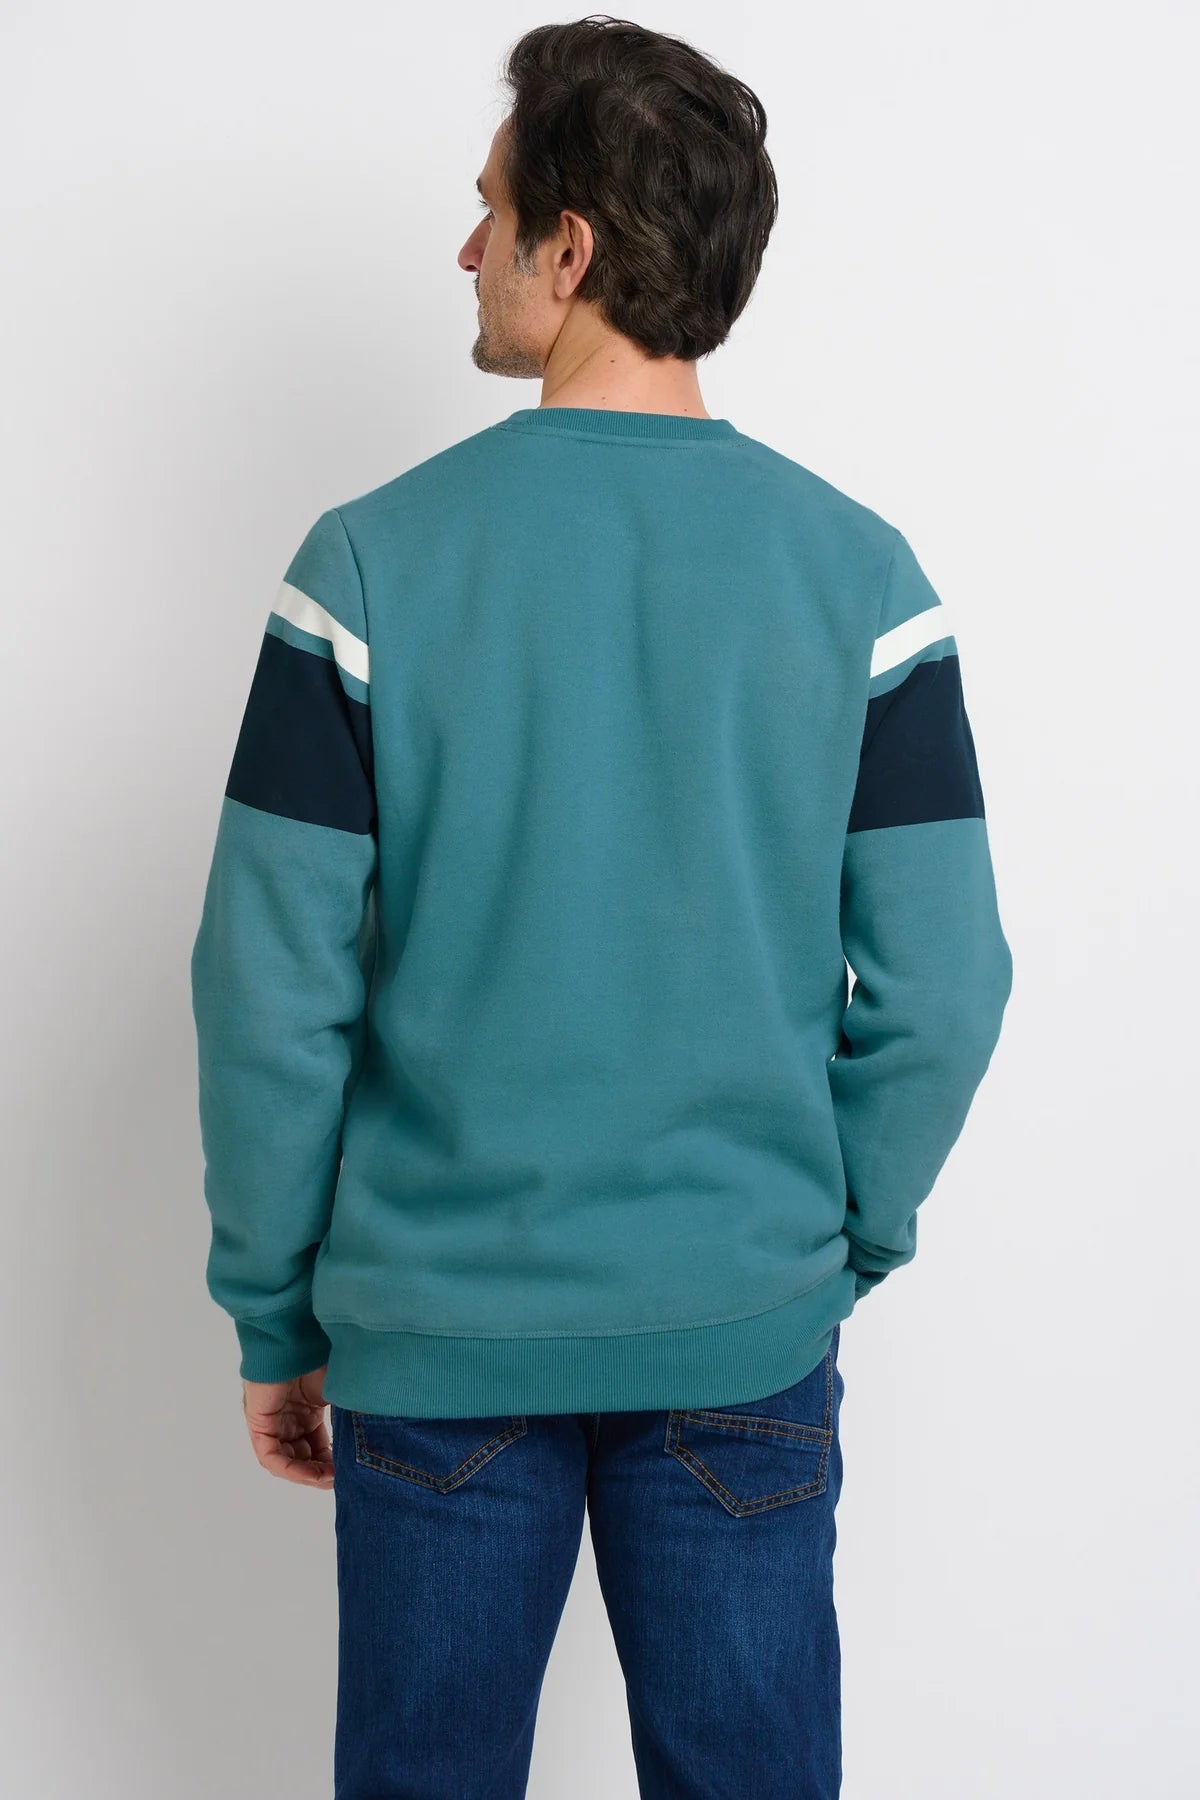 Men's blue crew neck sweatshirt with navy and white chest stripes from Brakeburn